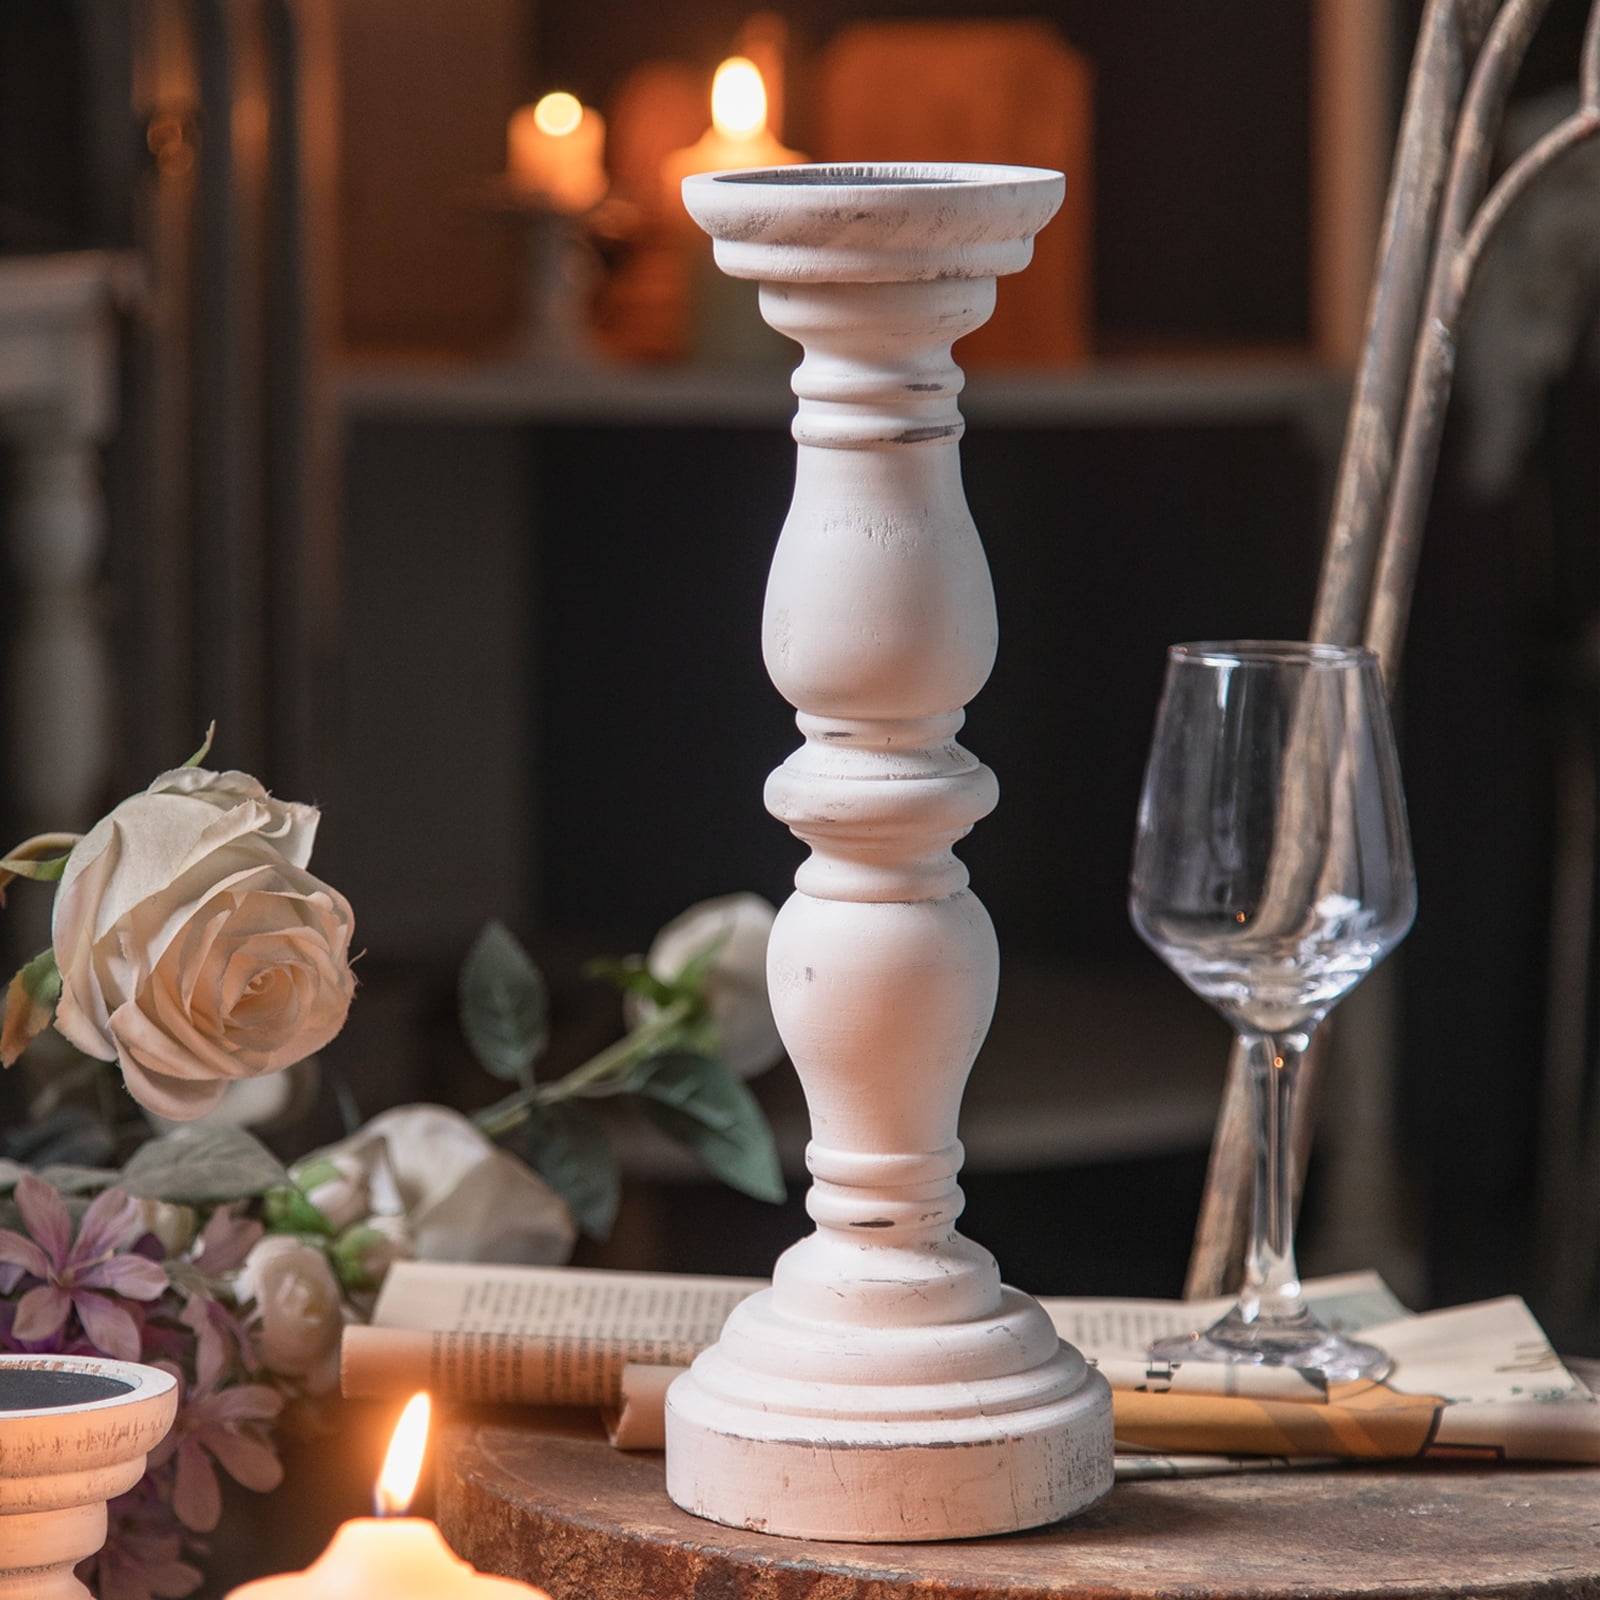 Farmhouse Rustic Candle Holder for Pillar Candle, Vintage White Wooden Antique  Candlestick Holder, 4.7 x 4.7 x 13.6 (s, m, l) 